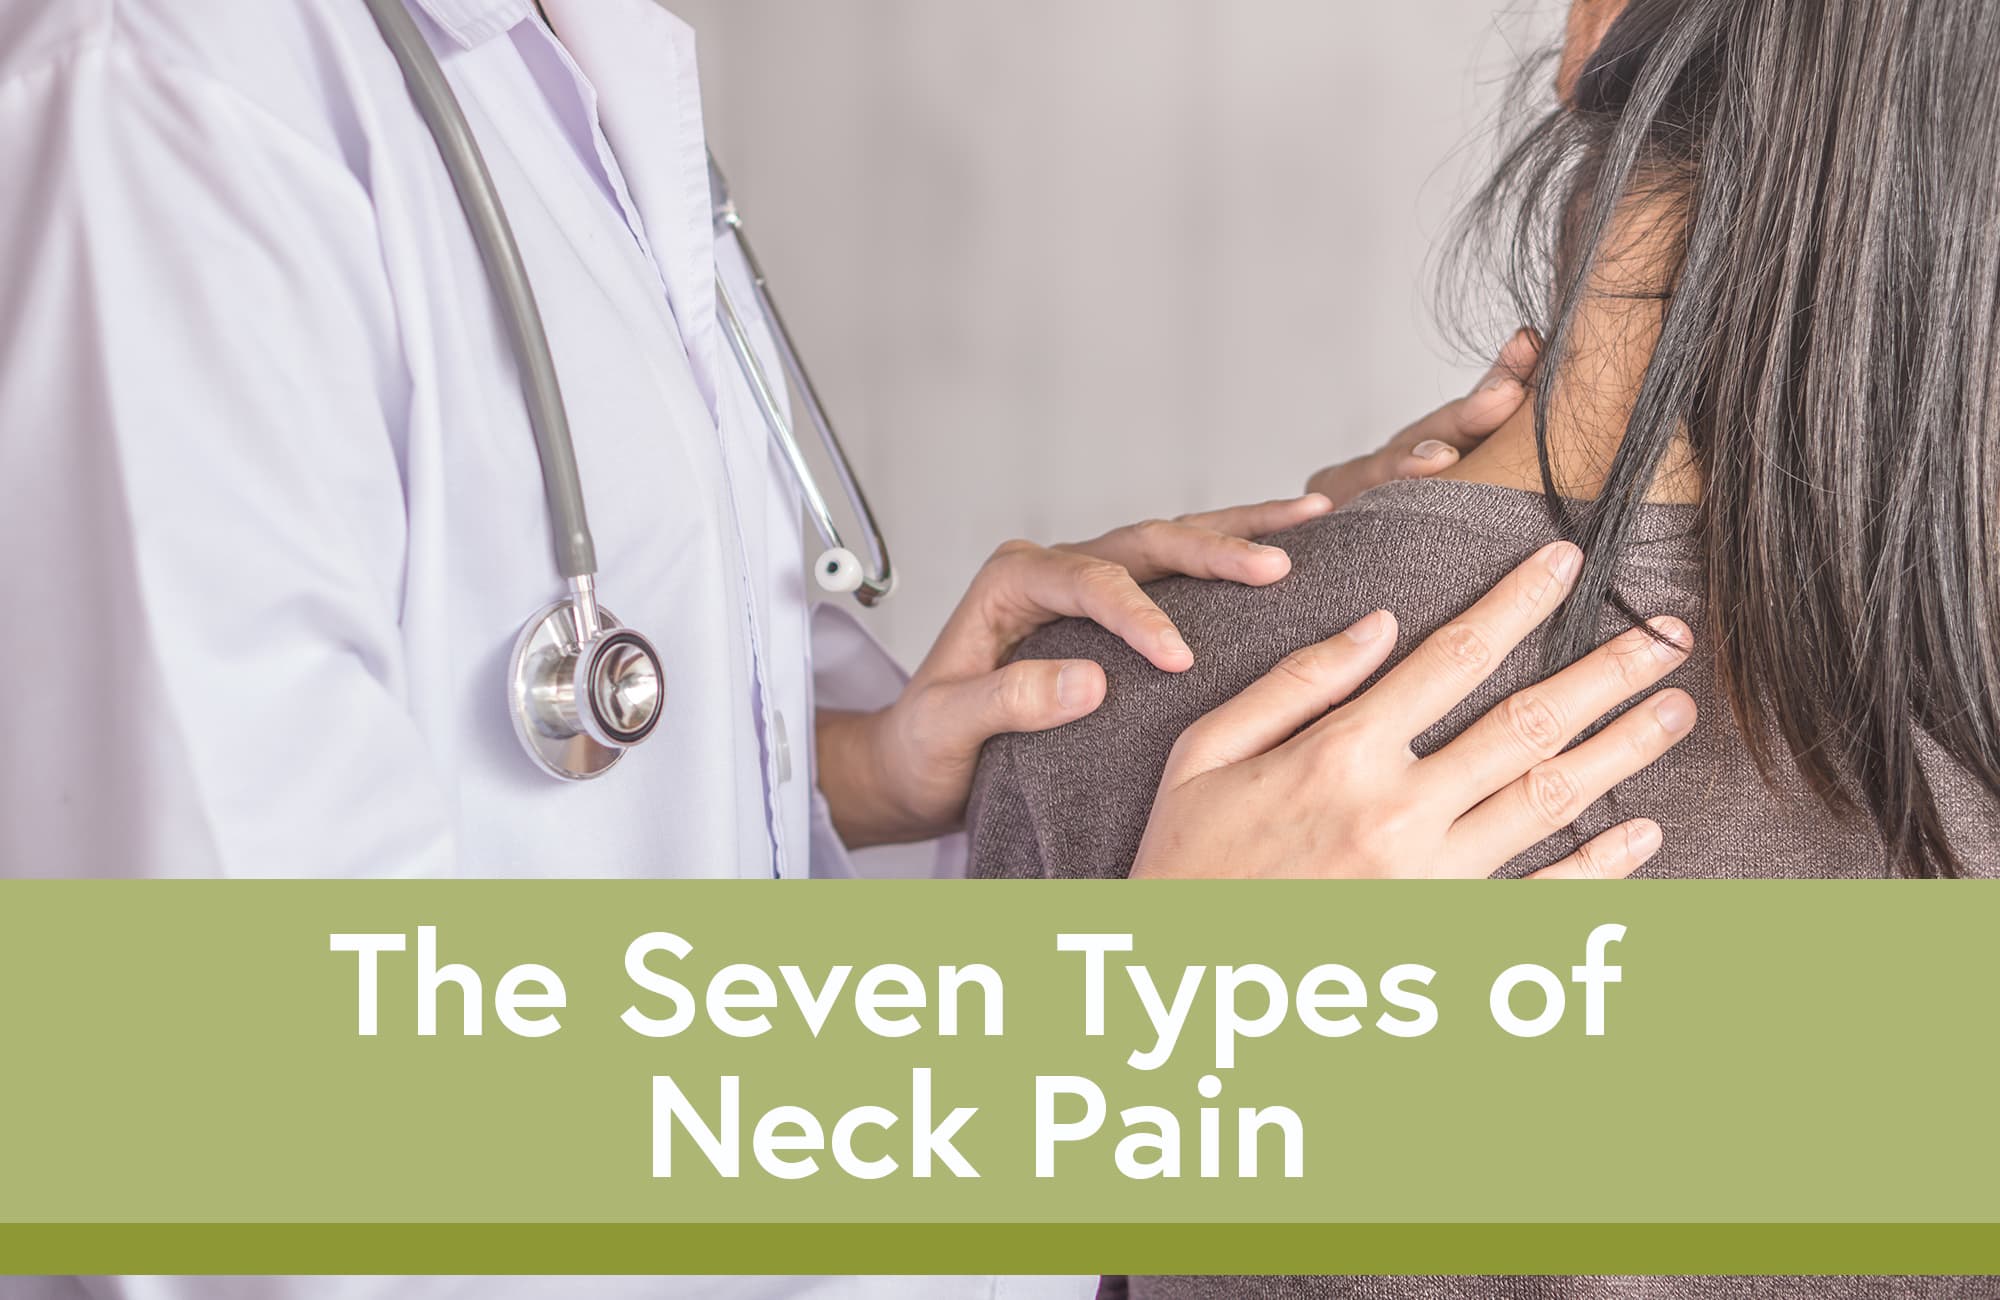 Back or Neck Pain? What Different Types of Pain Mean - Rehability